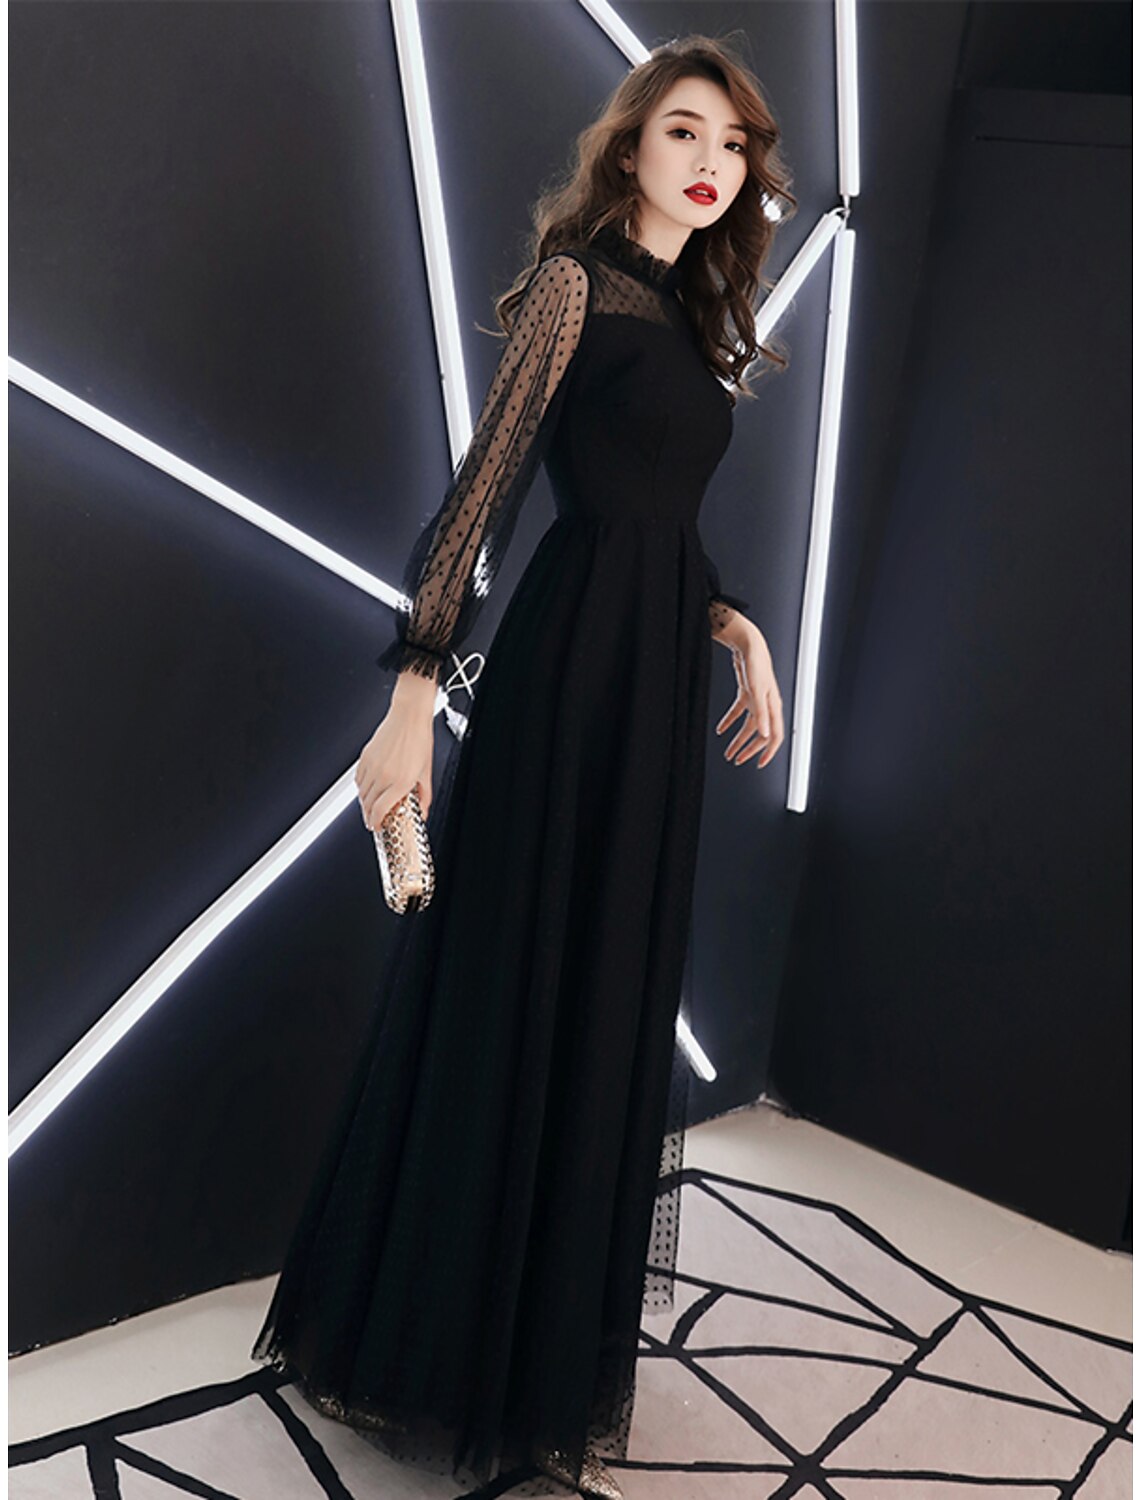 A-Line Little Black Dress Elegant Party Wear Prom Dress High Neck Long Sleeve Floor Length Lace with Ruffles